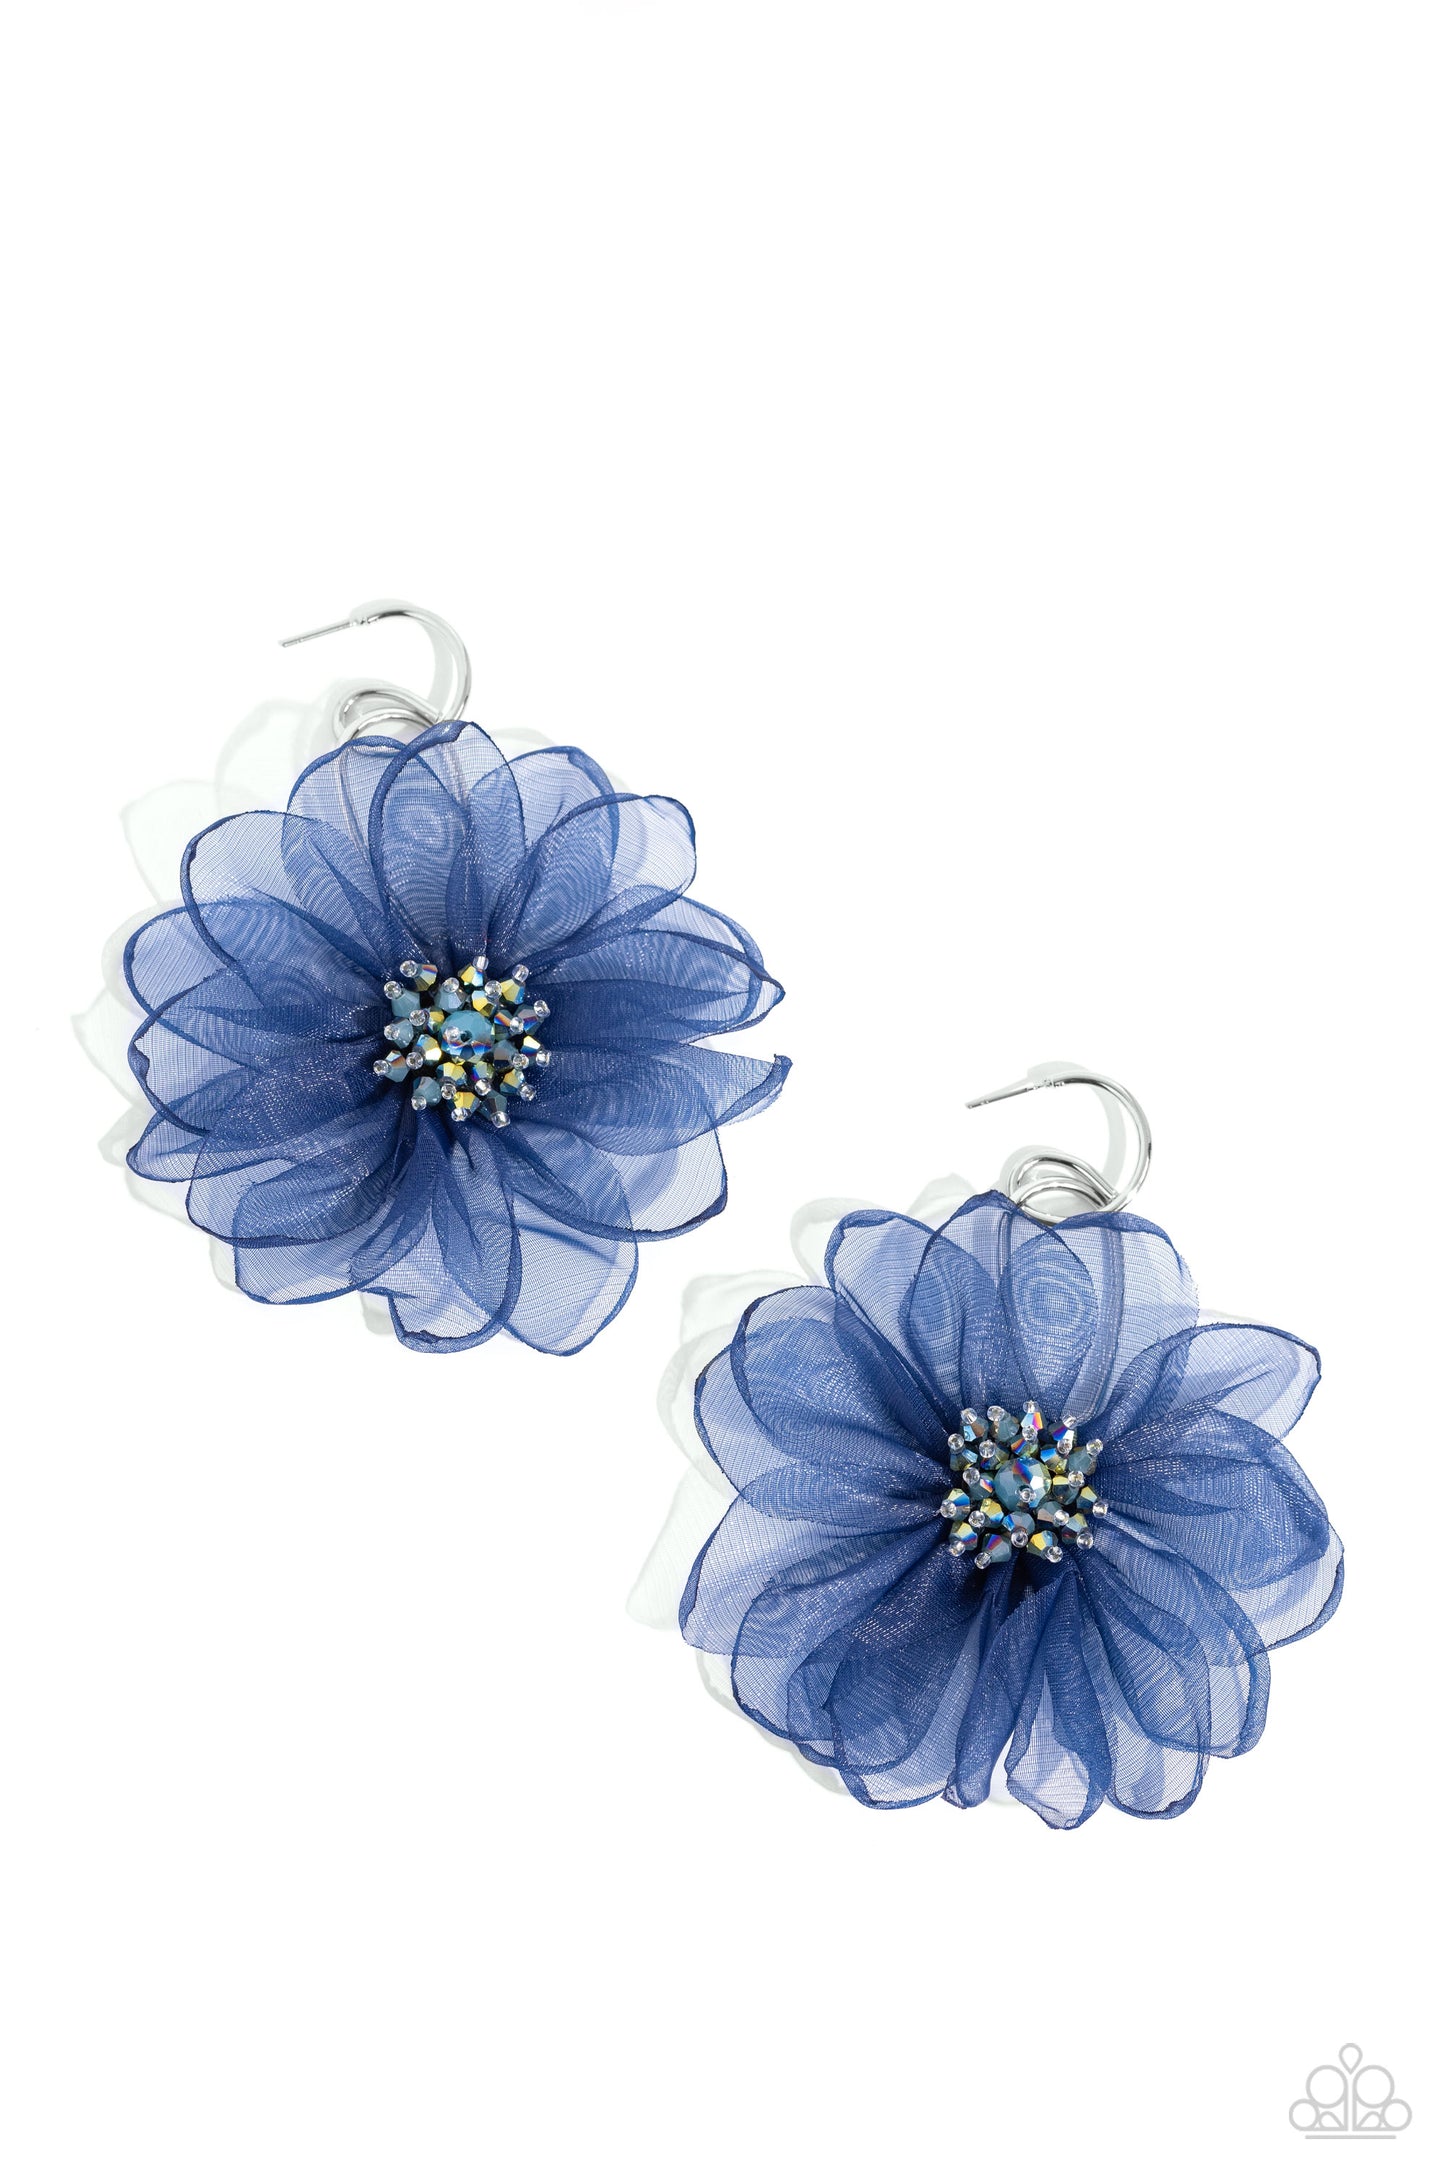 Paparazzi Accessories - Cosmopolitan Chiffon - Blue Earringthat duo of asymmetrical silver hoops link as they tumble from the ear, coalescing into an abstract lure. Attached to the bottom of the elongated display, oversized navy chiffon petals bloom around oil spill-tinted beads, creating a fantastical floral frenzy. Earring attaches to a standard post fitting. Hoop measures approximately 1" in diameter.  Sold as one pair of hoop earrings.